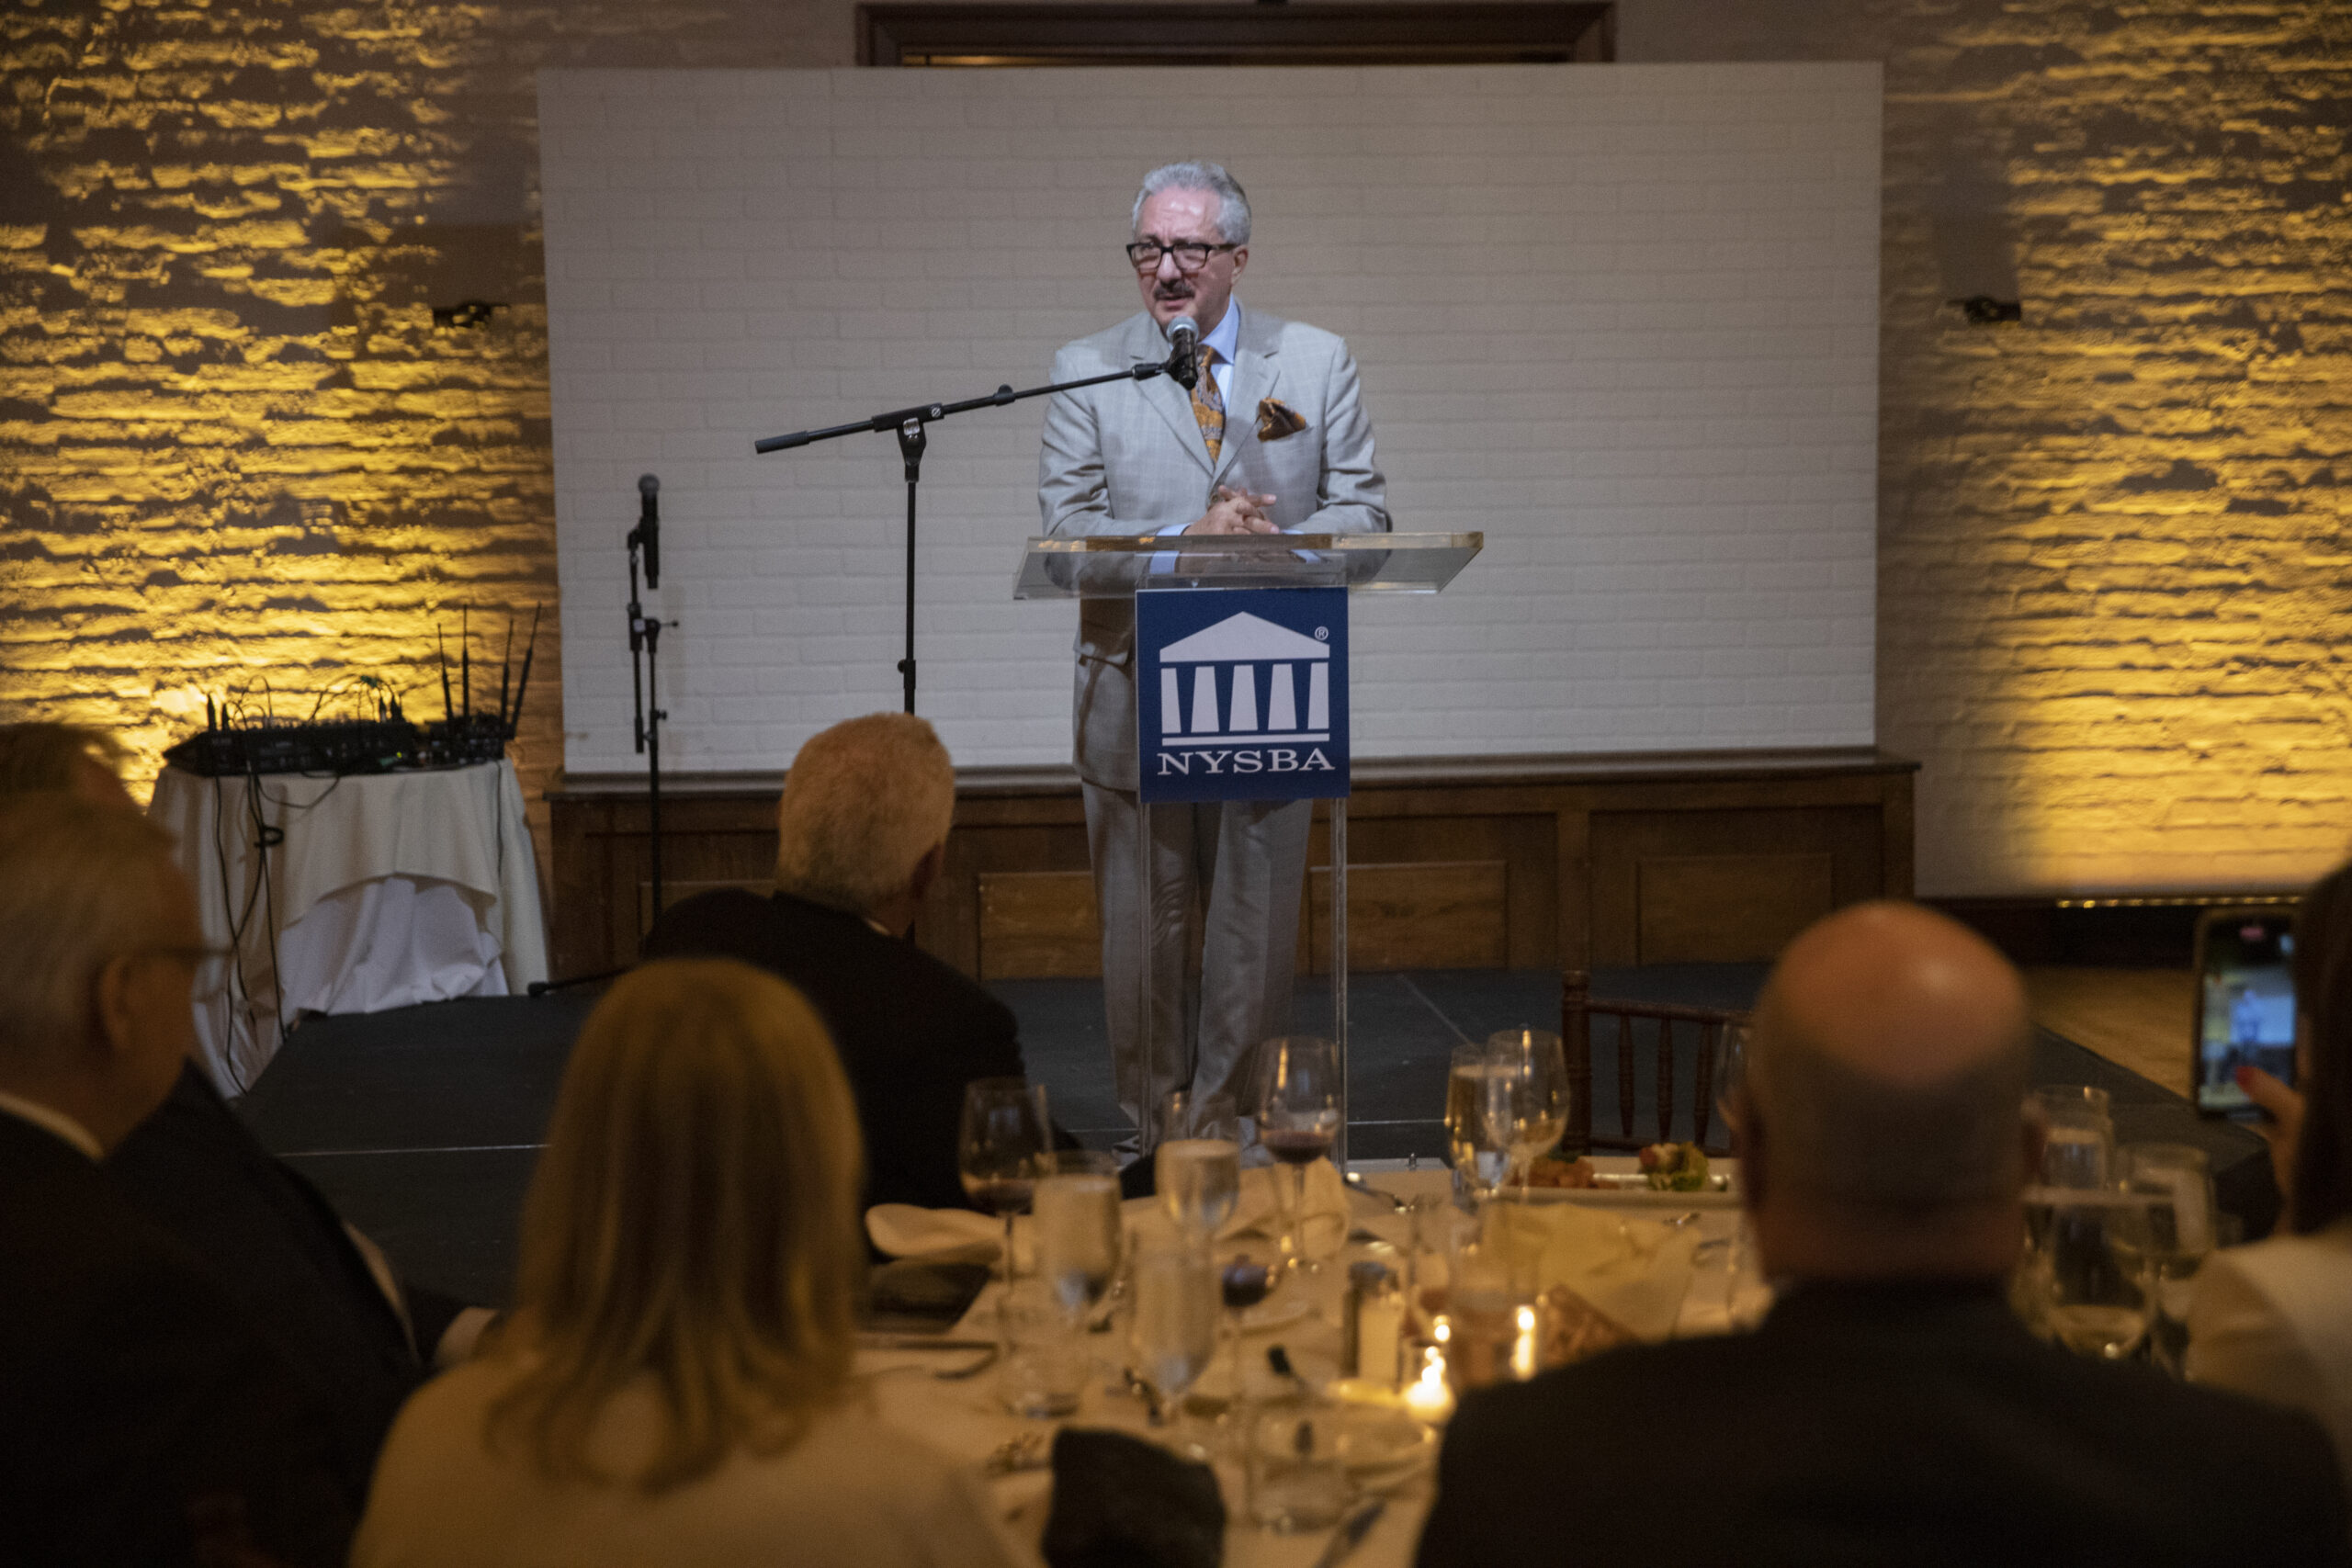 Domenick Napoletano, newly installed as the 127th president of the New York State Bar Association, addresses attendees at the Liberty Warehouse in Red Hook, Brooklyn. Eagle photos by John McCarten